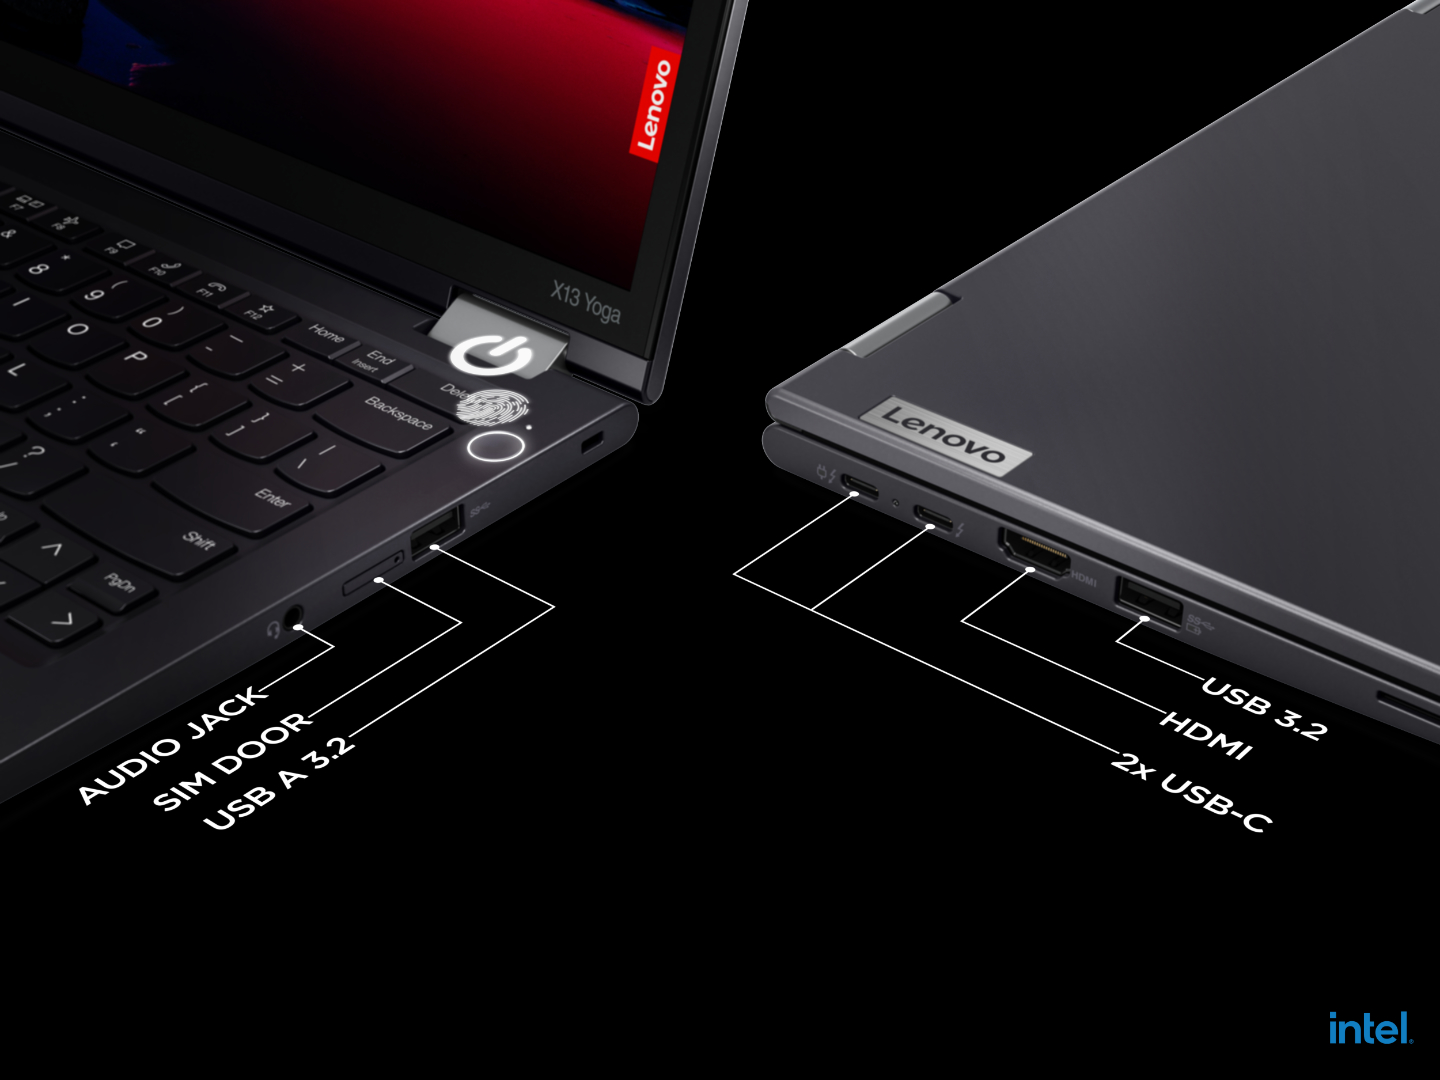 Lenovo ThinkPad X13 Yoga Gen 3: New  convertible unveiled with  12th Gen Intel Core processors with a larger battery   News